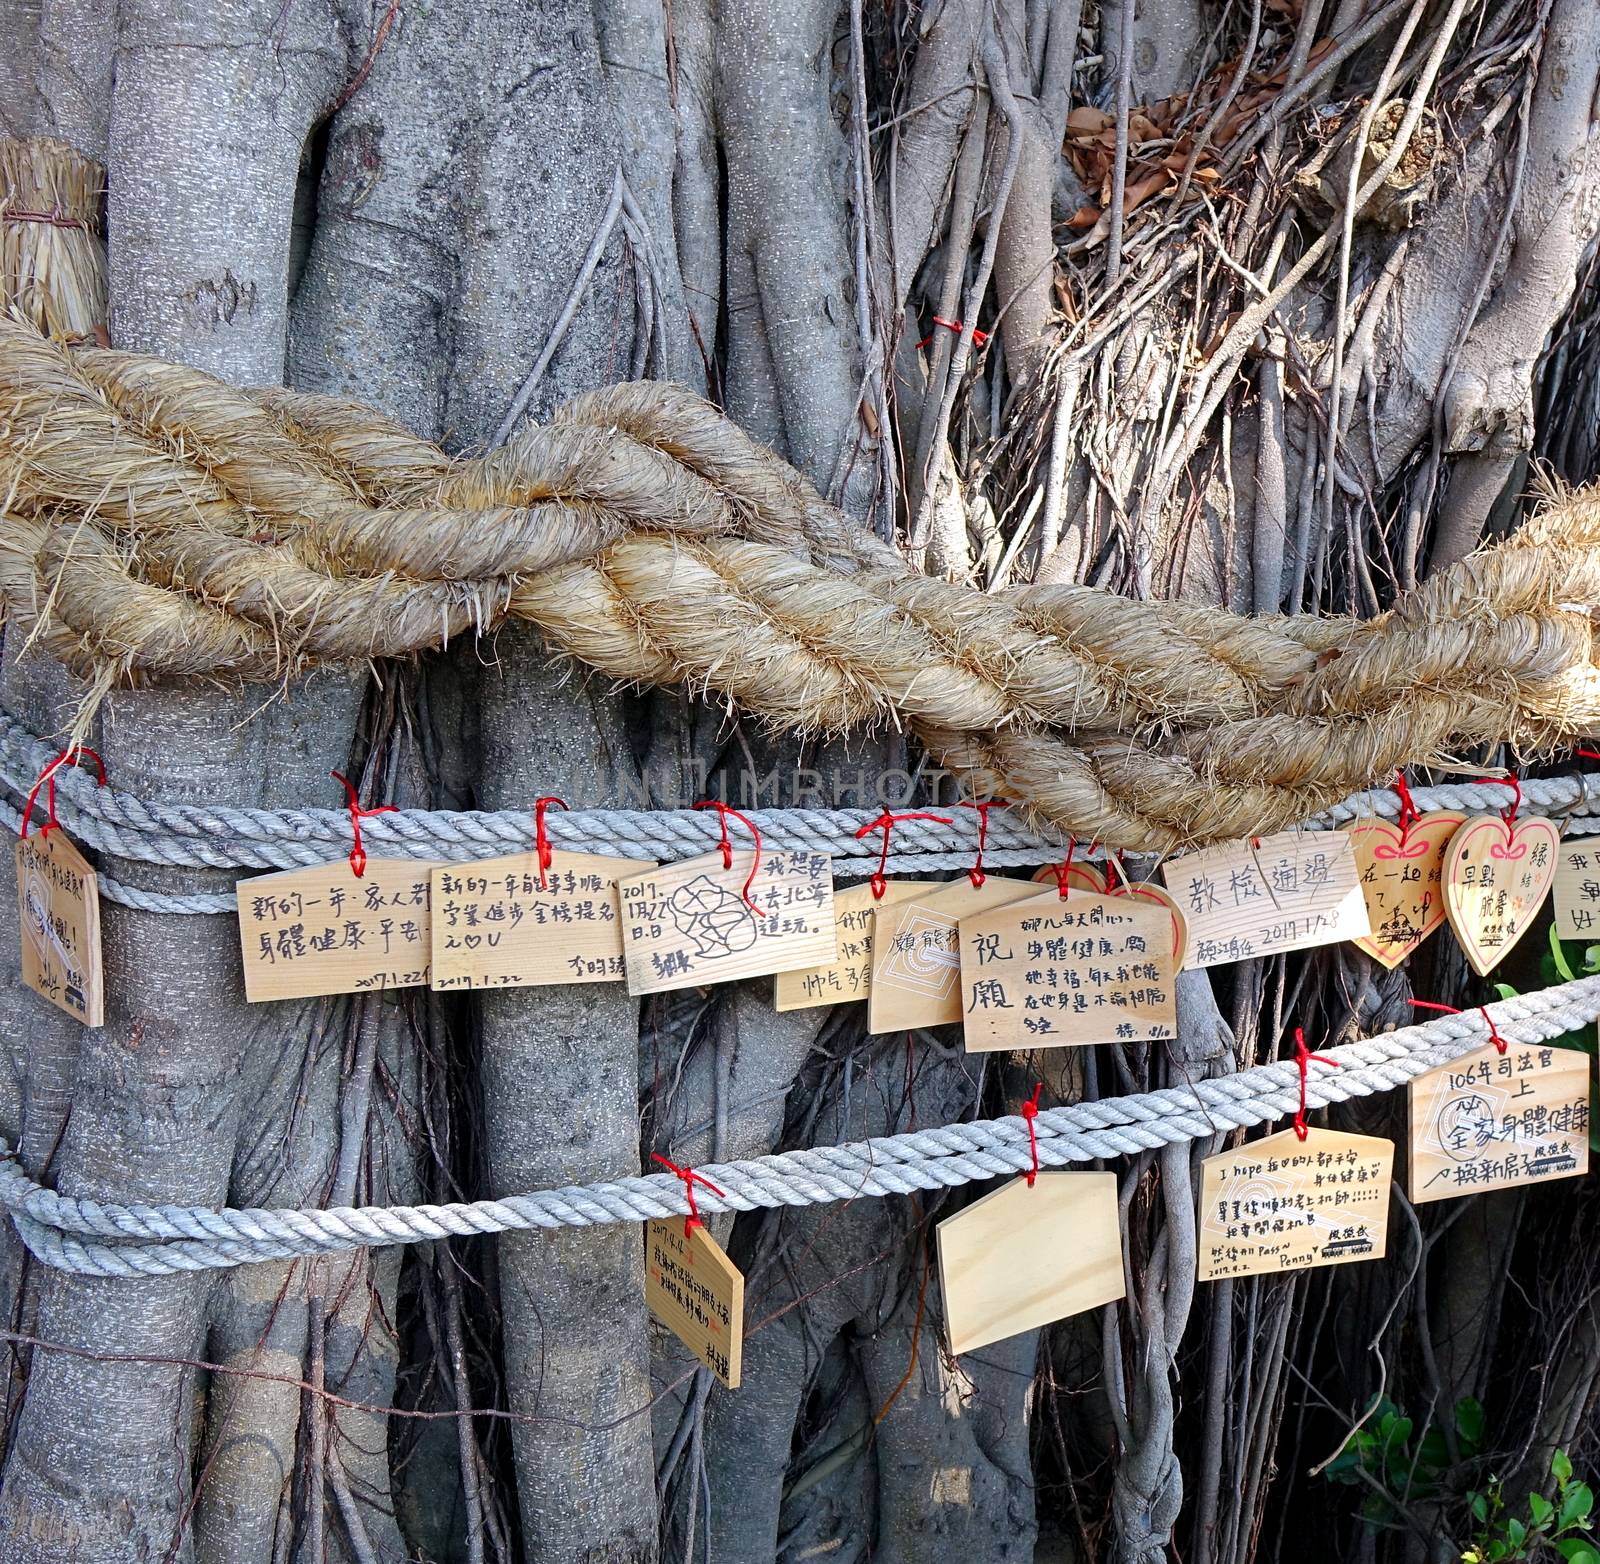 KAOHSIUNG, TAIWAN -- APRIL 29, 2017: An old banyan tree outside the Wu De Martial Arts Hall serves as a wishing tree with little wooden signs attached.